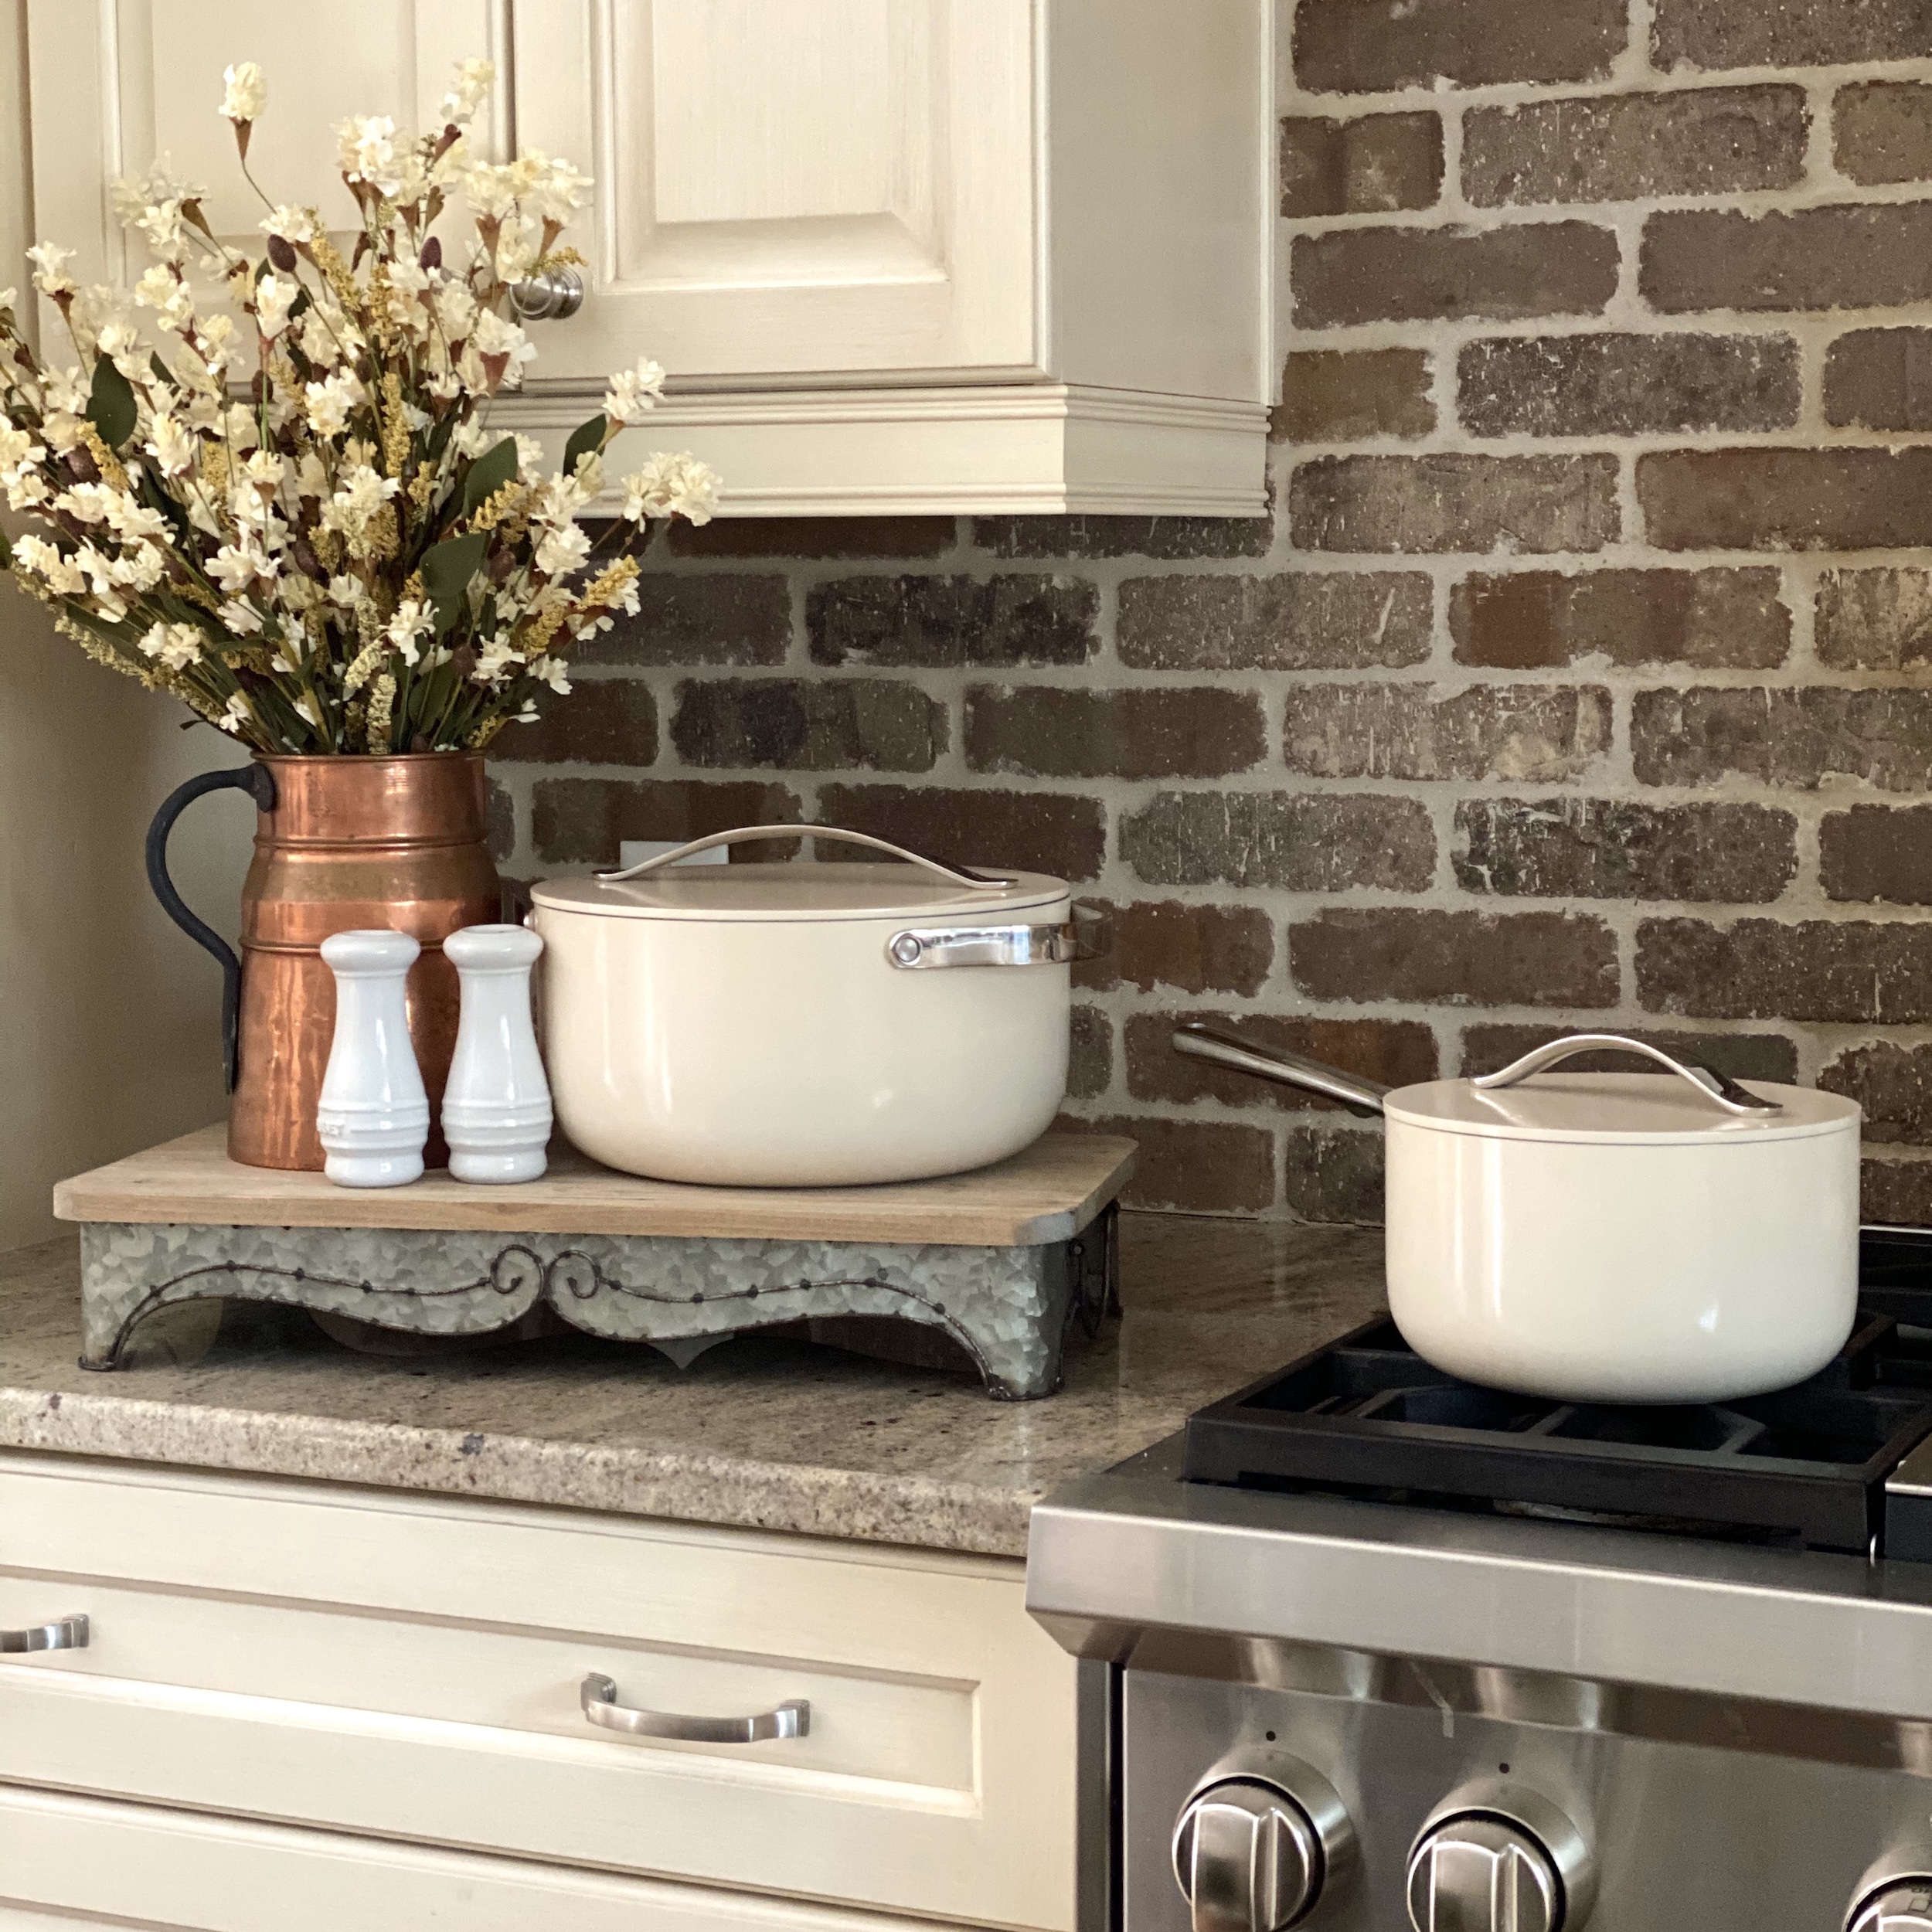 Cream Caraway pots displayed on the stove and counter.